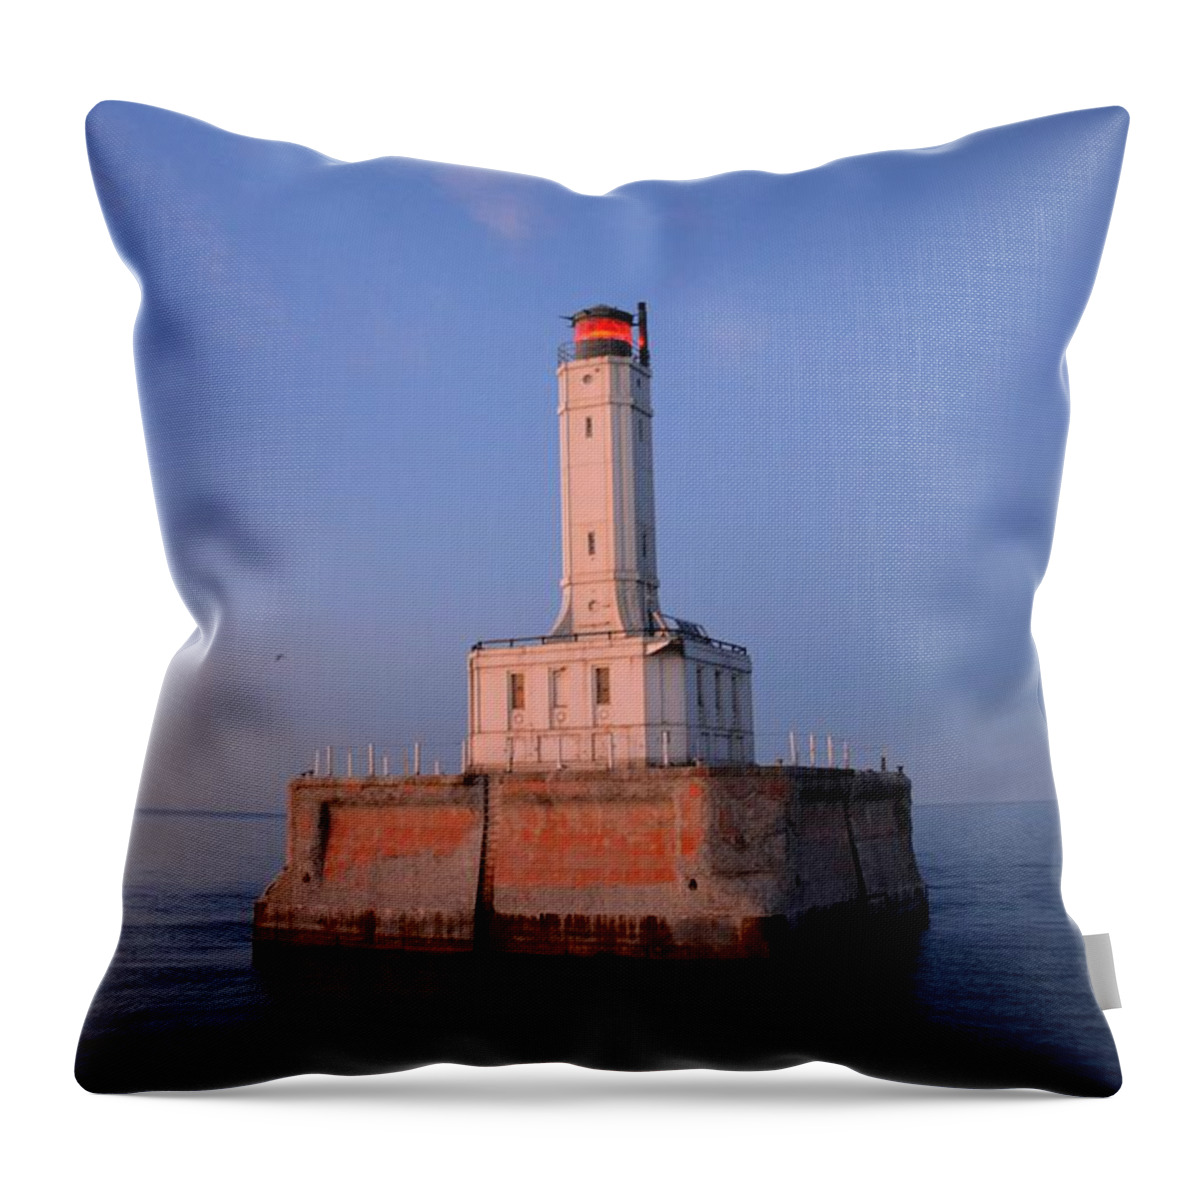 Lighthouse Throw Pillow featuring the photograph Grays Reef Lighthouse by Keith Stokes